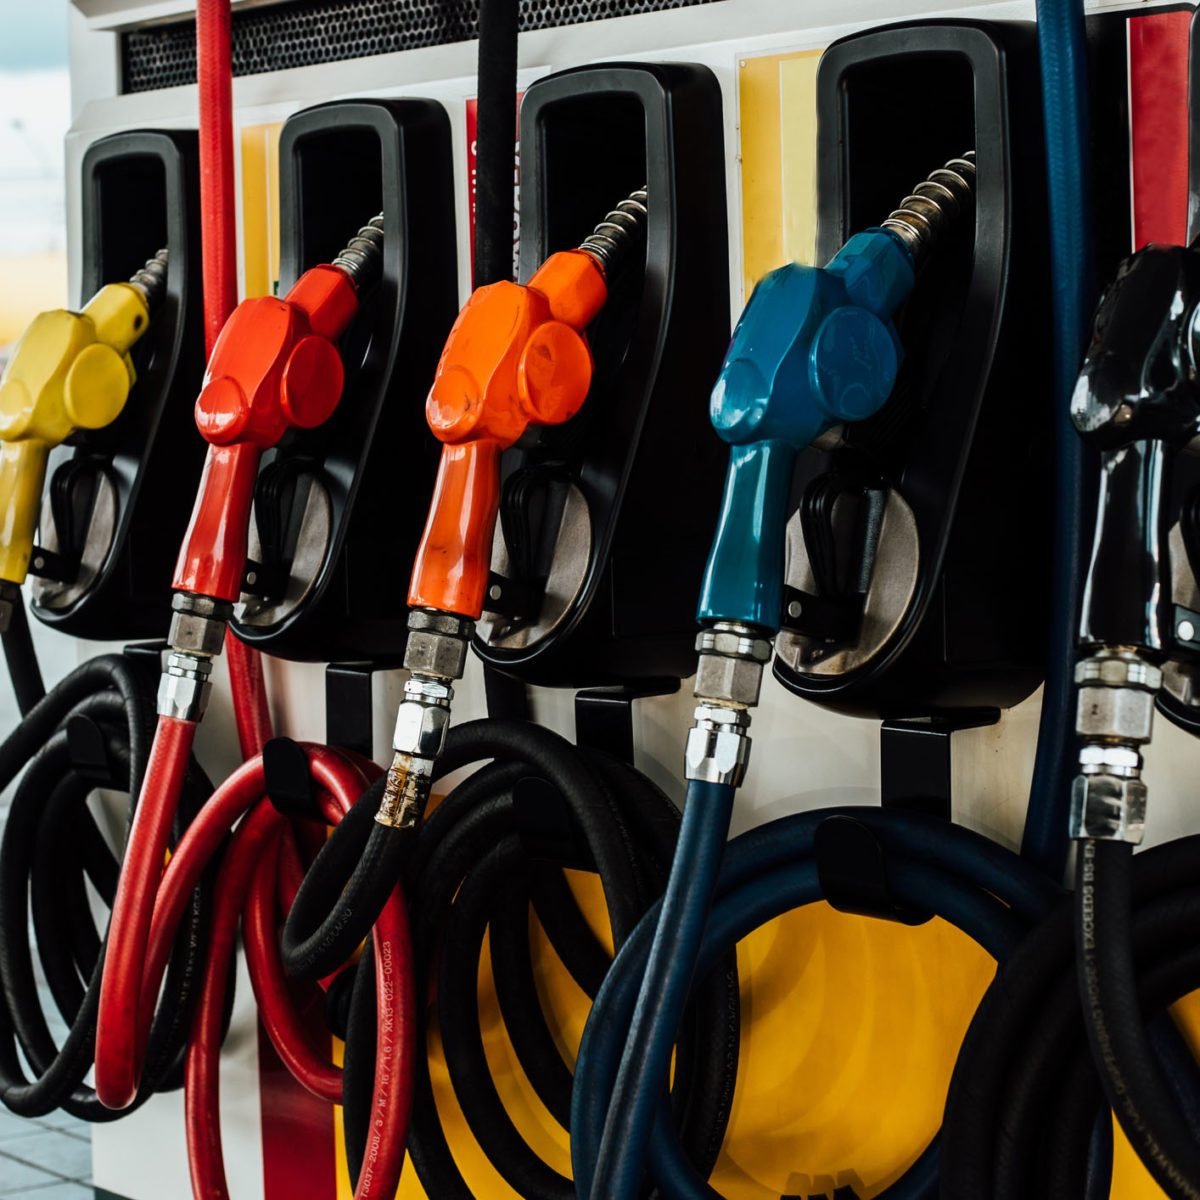 Regular vs. Premium Gasoline: Does It Really Matter Which You Use?